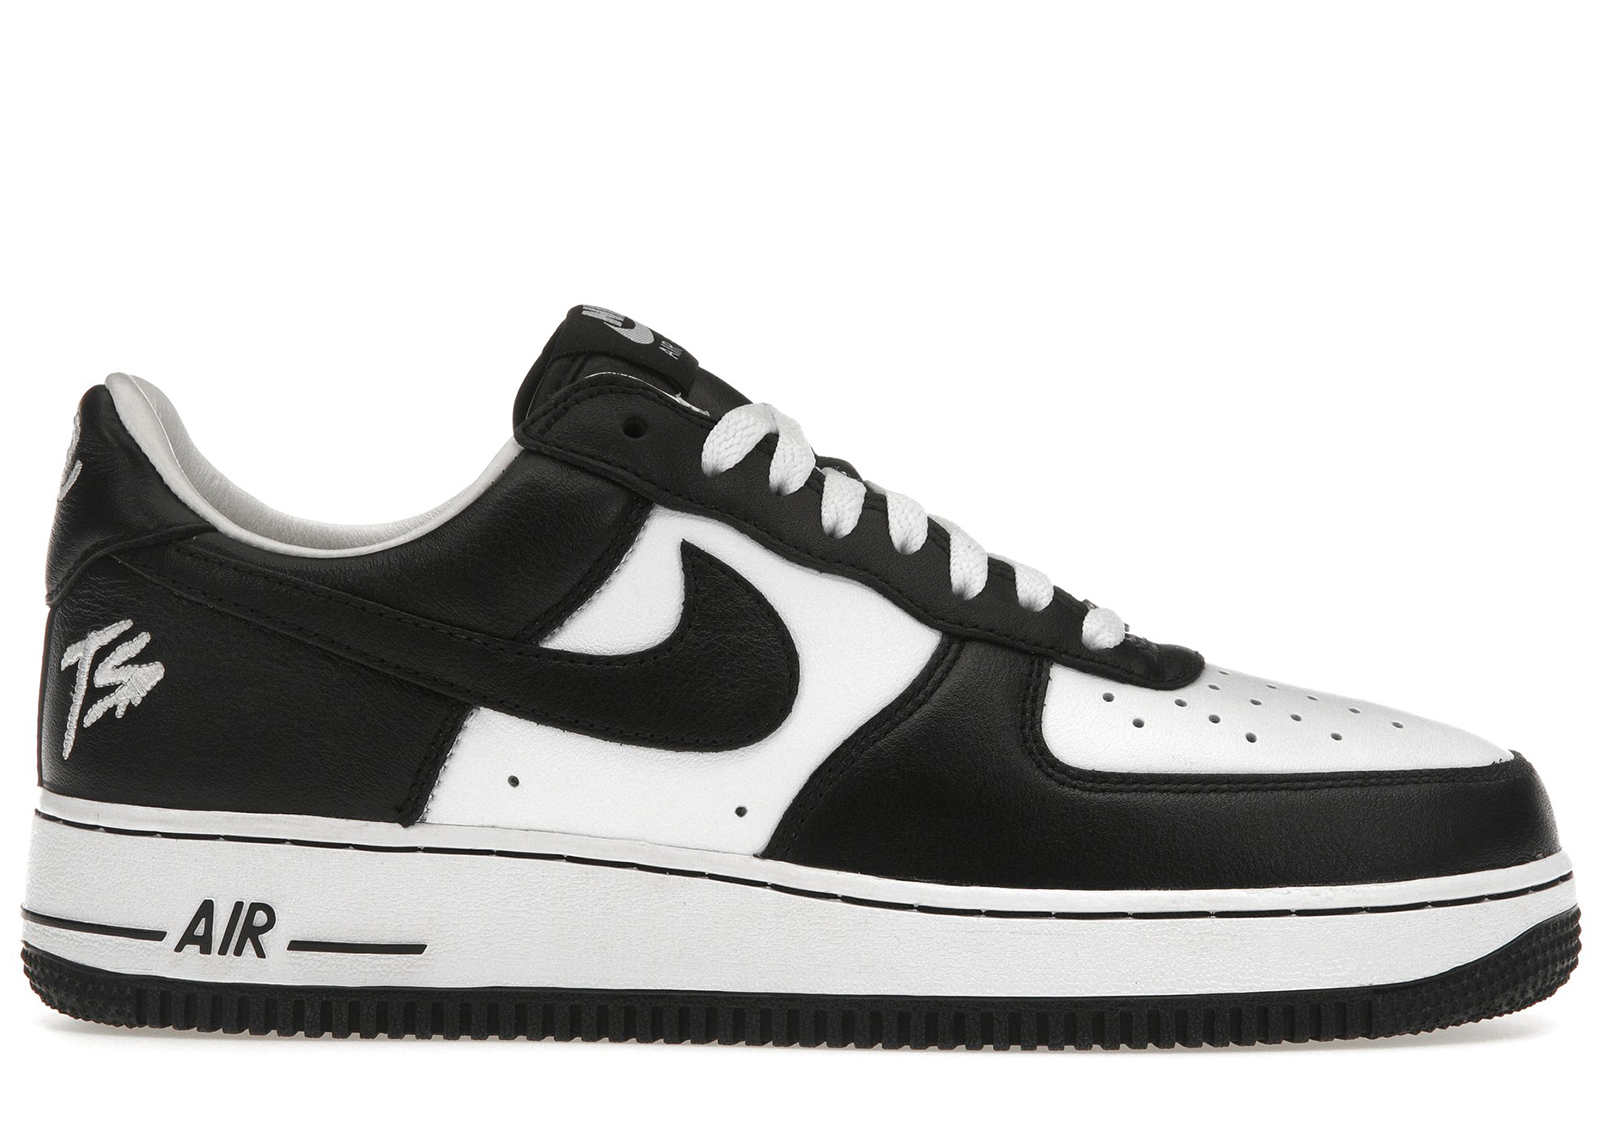 Nike Air Force 1 low qs blackout